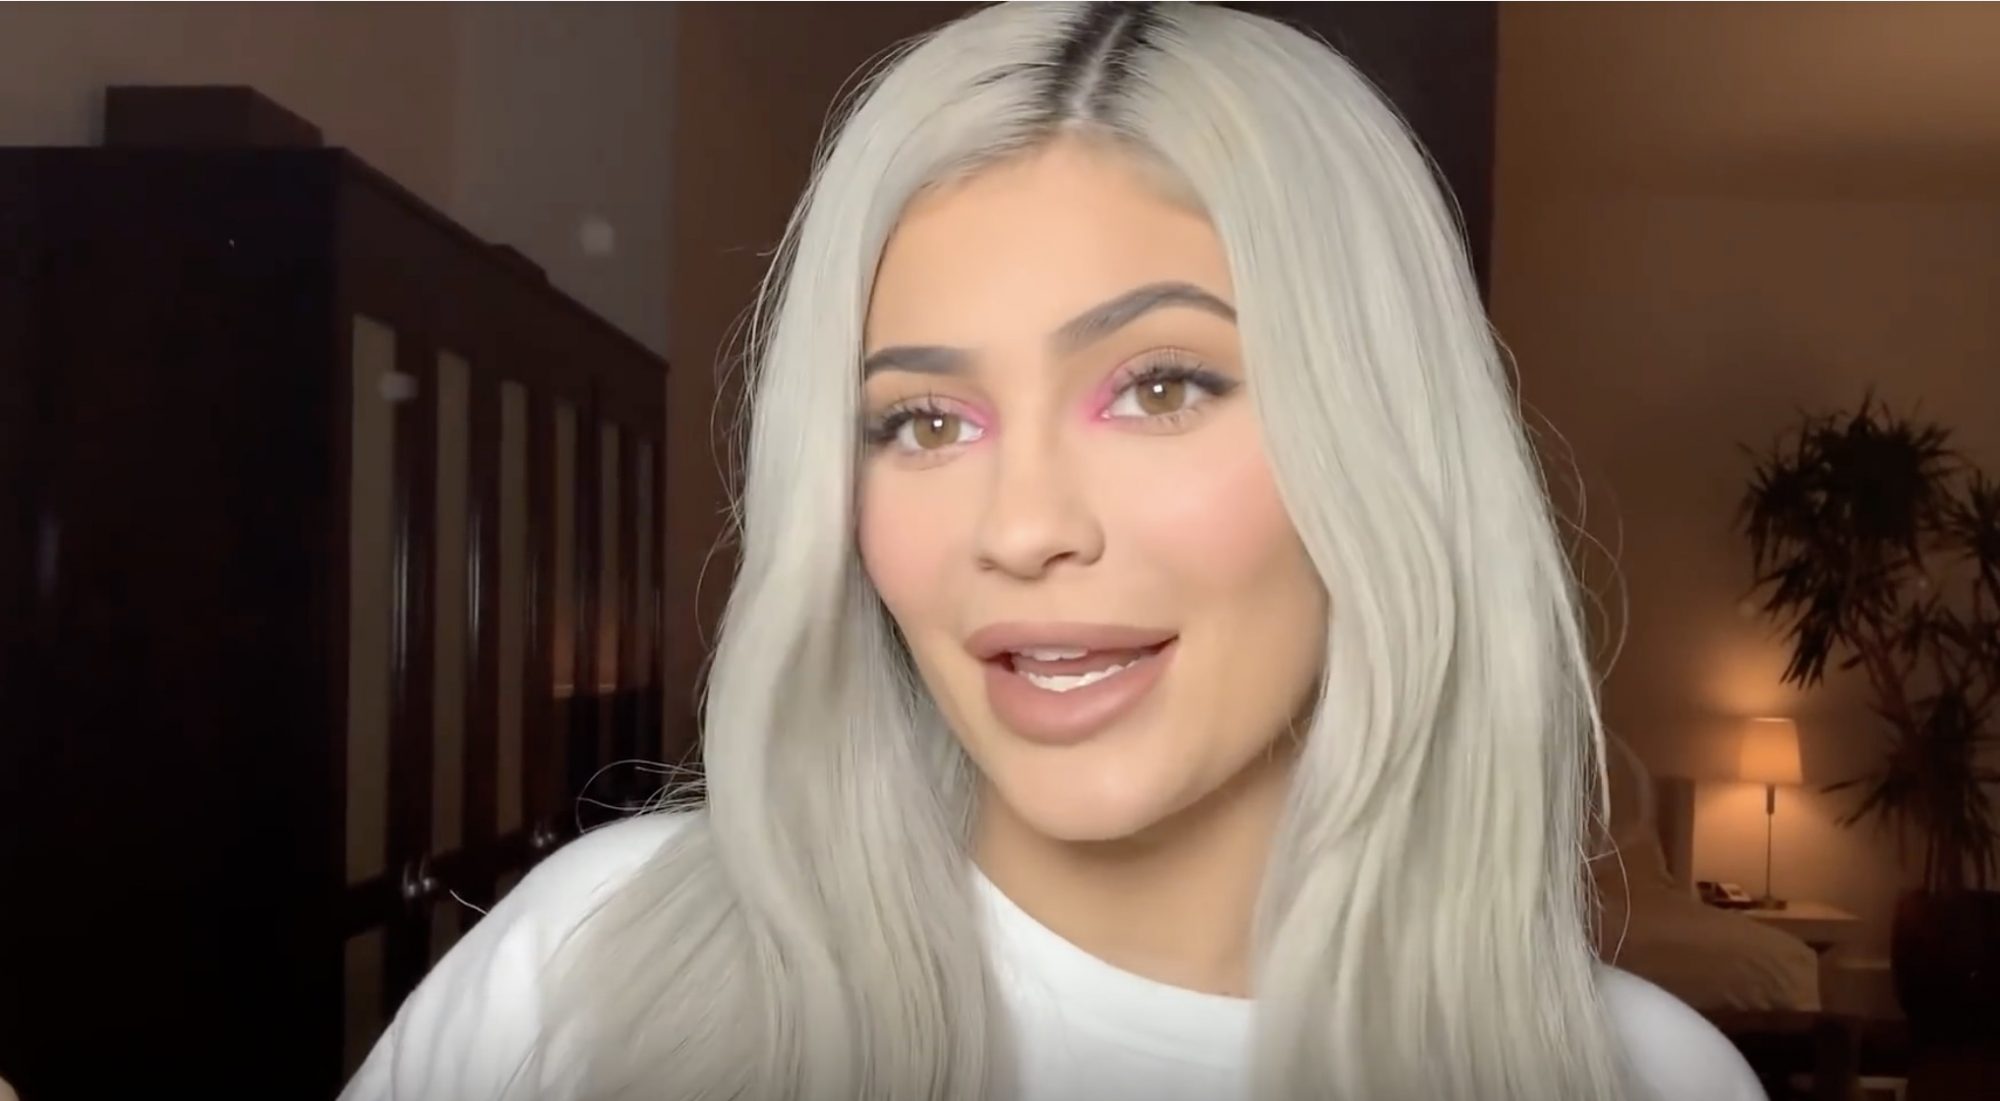 Kylie Jenner Always Books A Second Hotel Room When She TravelsHelloGiggles